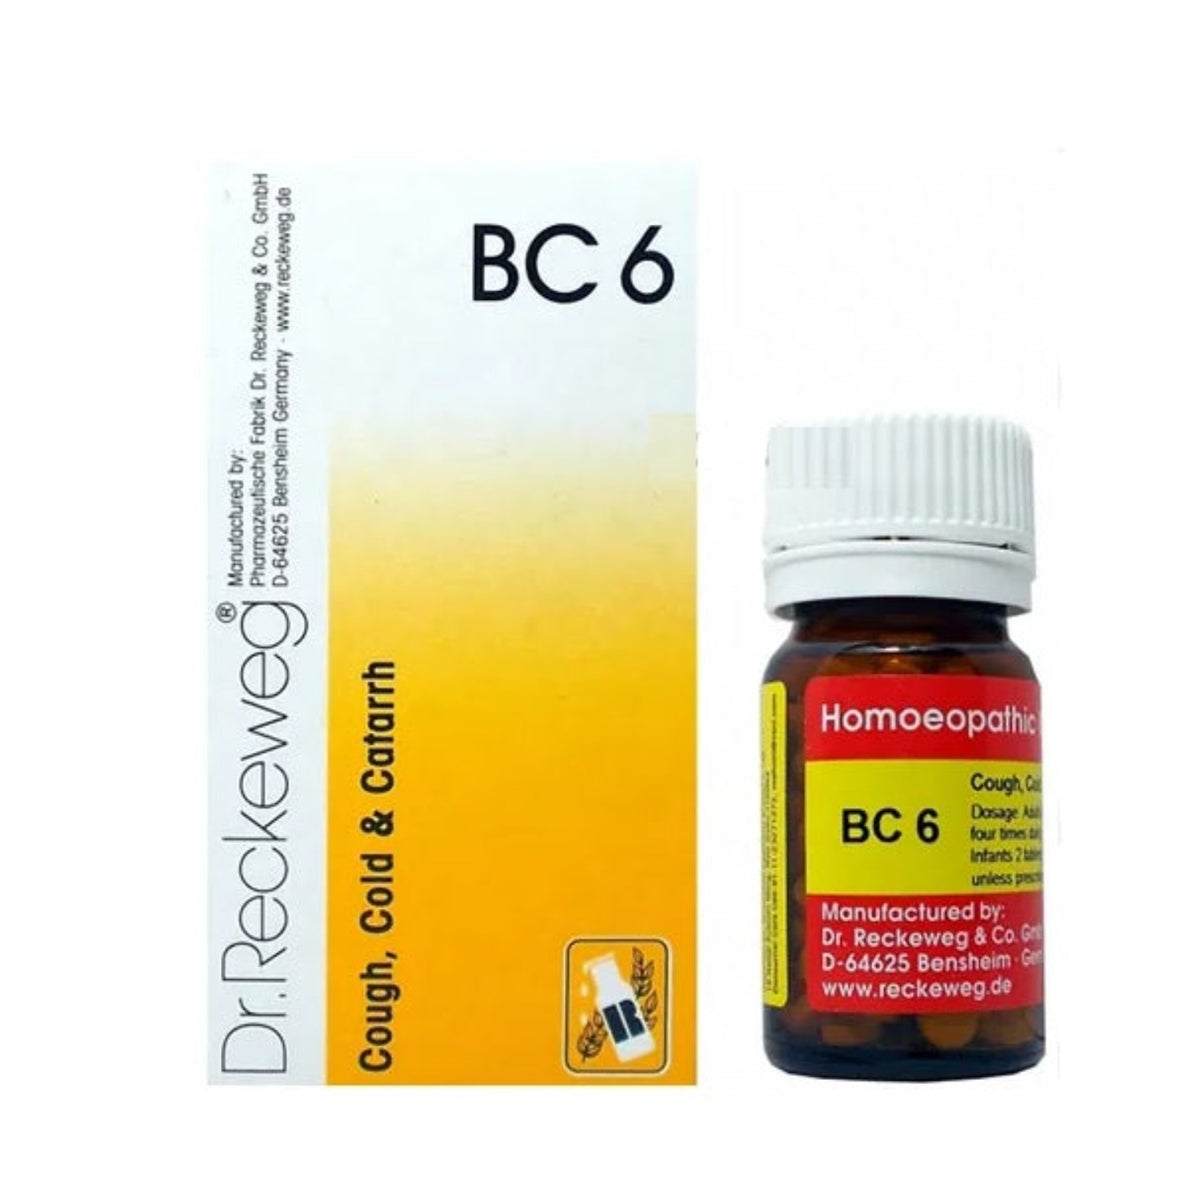 Dr Reckeweg Homoeopathy Cough,Cold & Catarrh Bio-Combination 6 (BC 6) 20gm Tablet